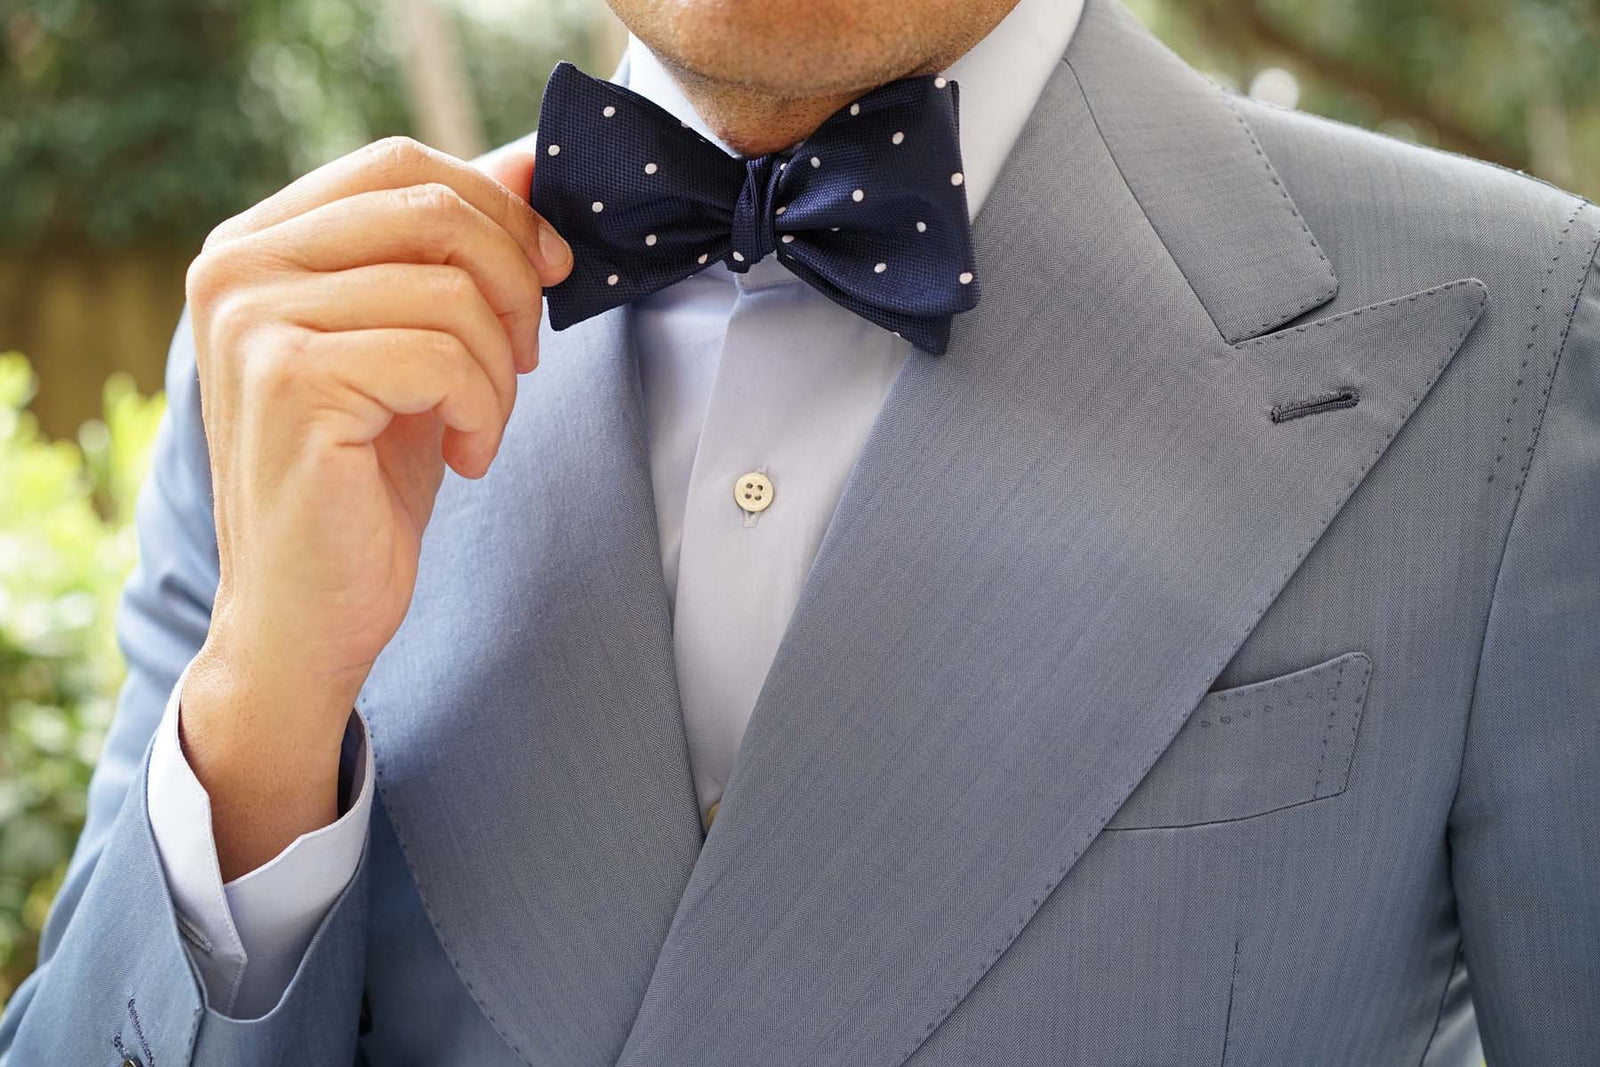 Navy Blue with White Polkadots - Bow Tie (Untied) | Self Tie, Untied ...